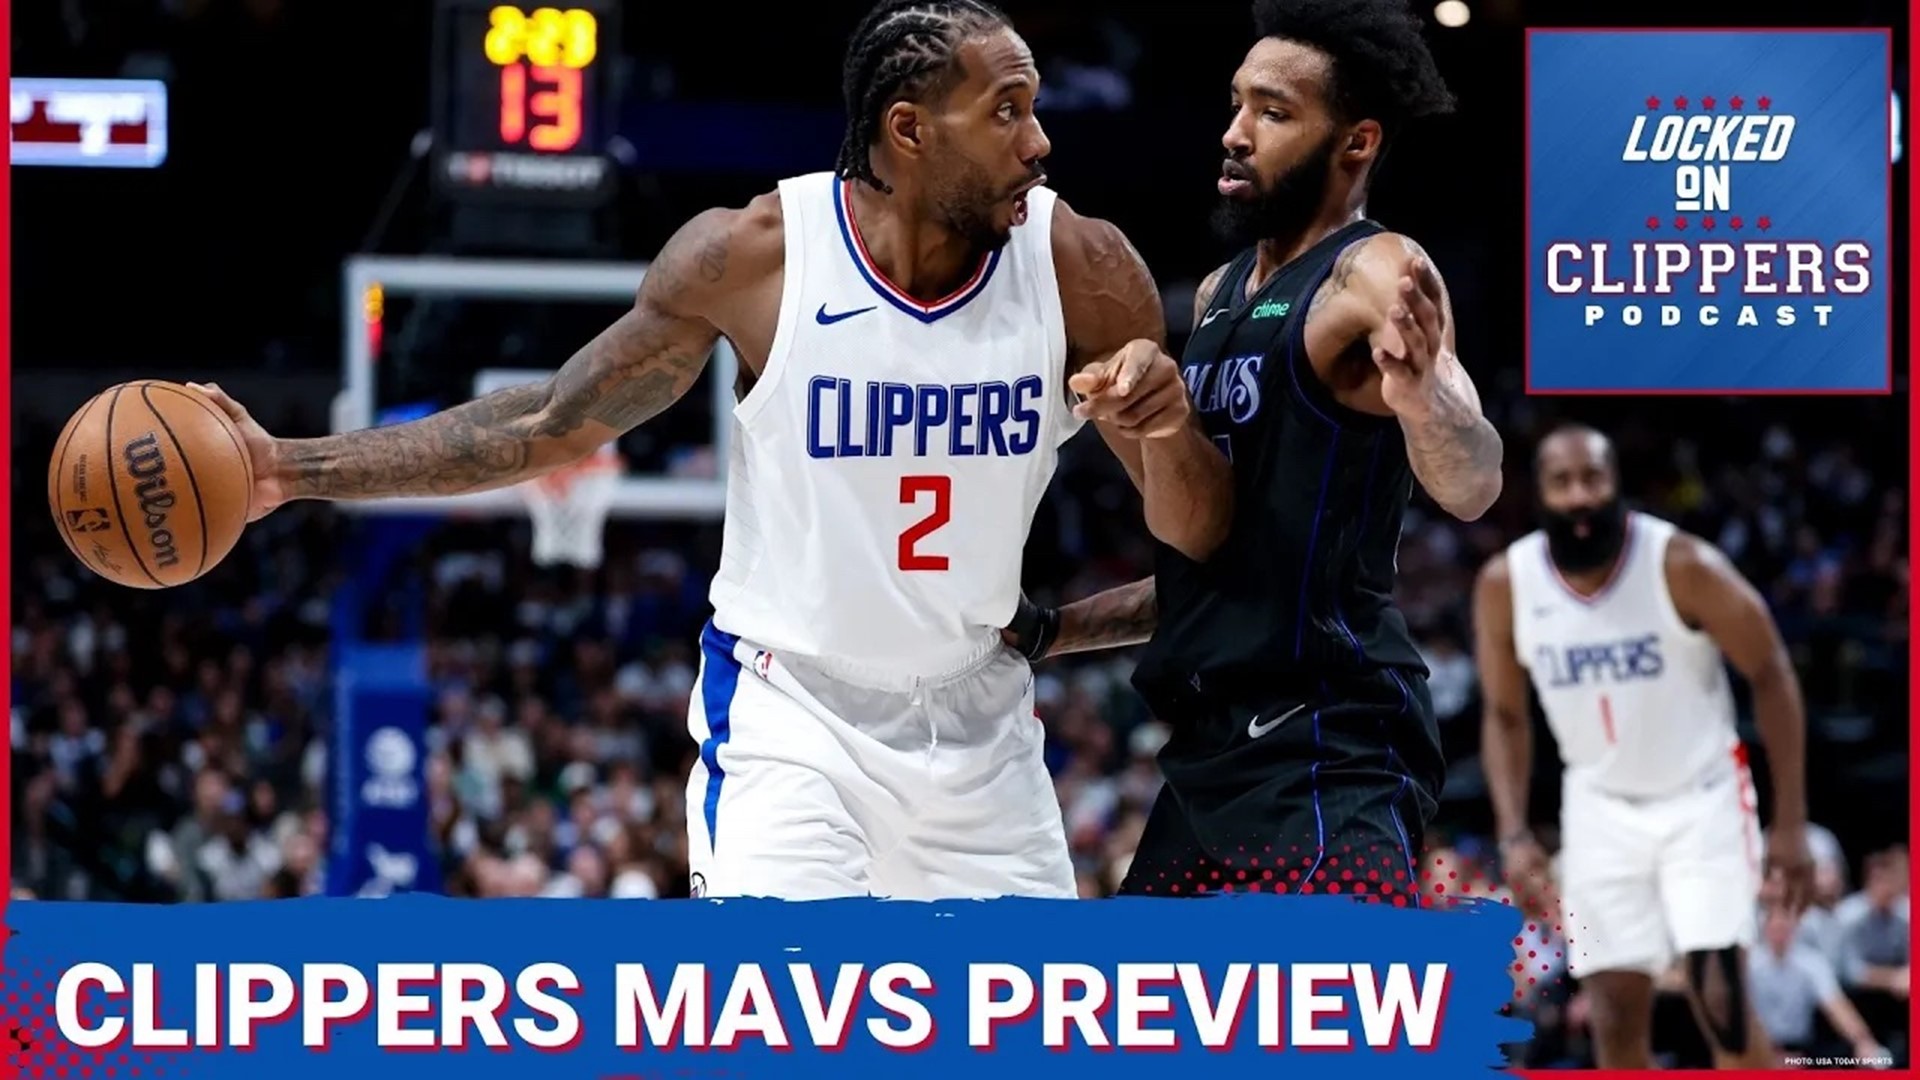 Darian Vaziri and Nick Angstadt collaborate for a crossover episode previewing the first-round series between the Dallas Mavericks and LA Clippers.